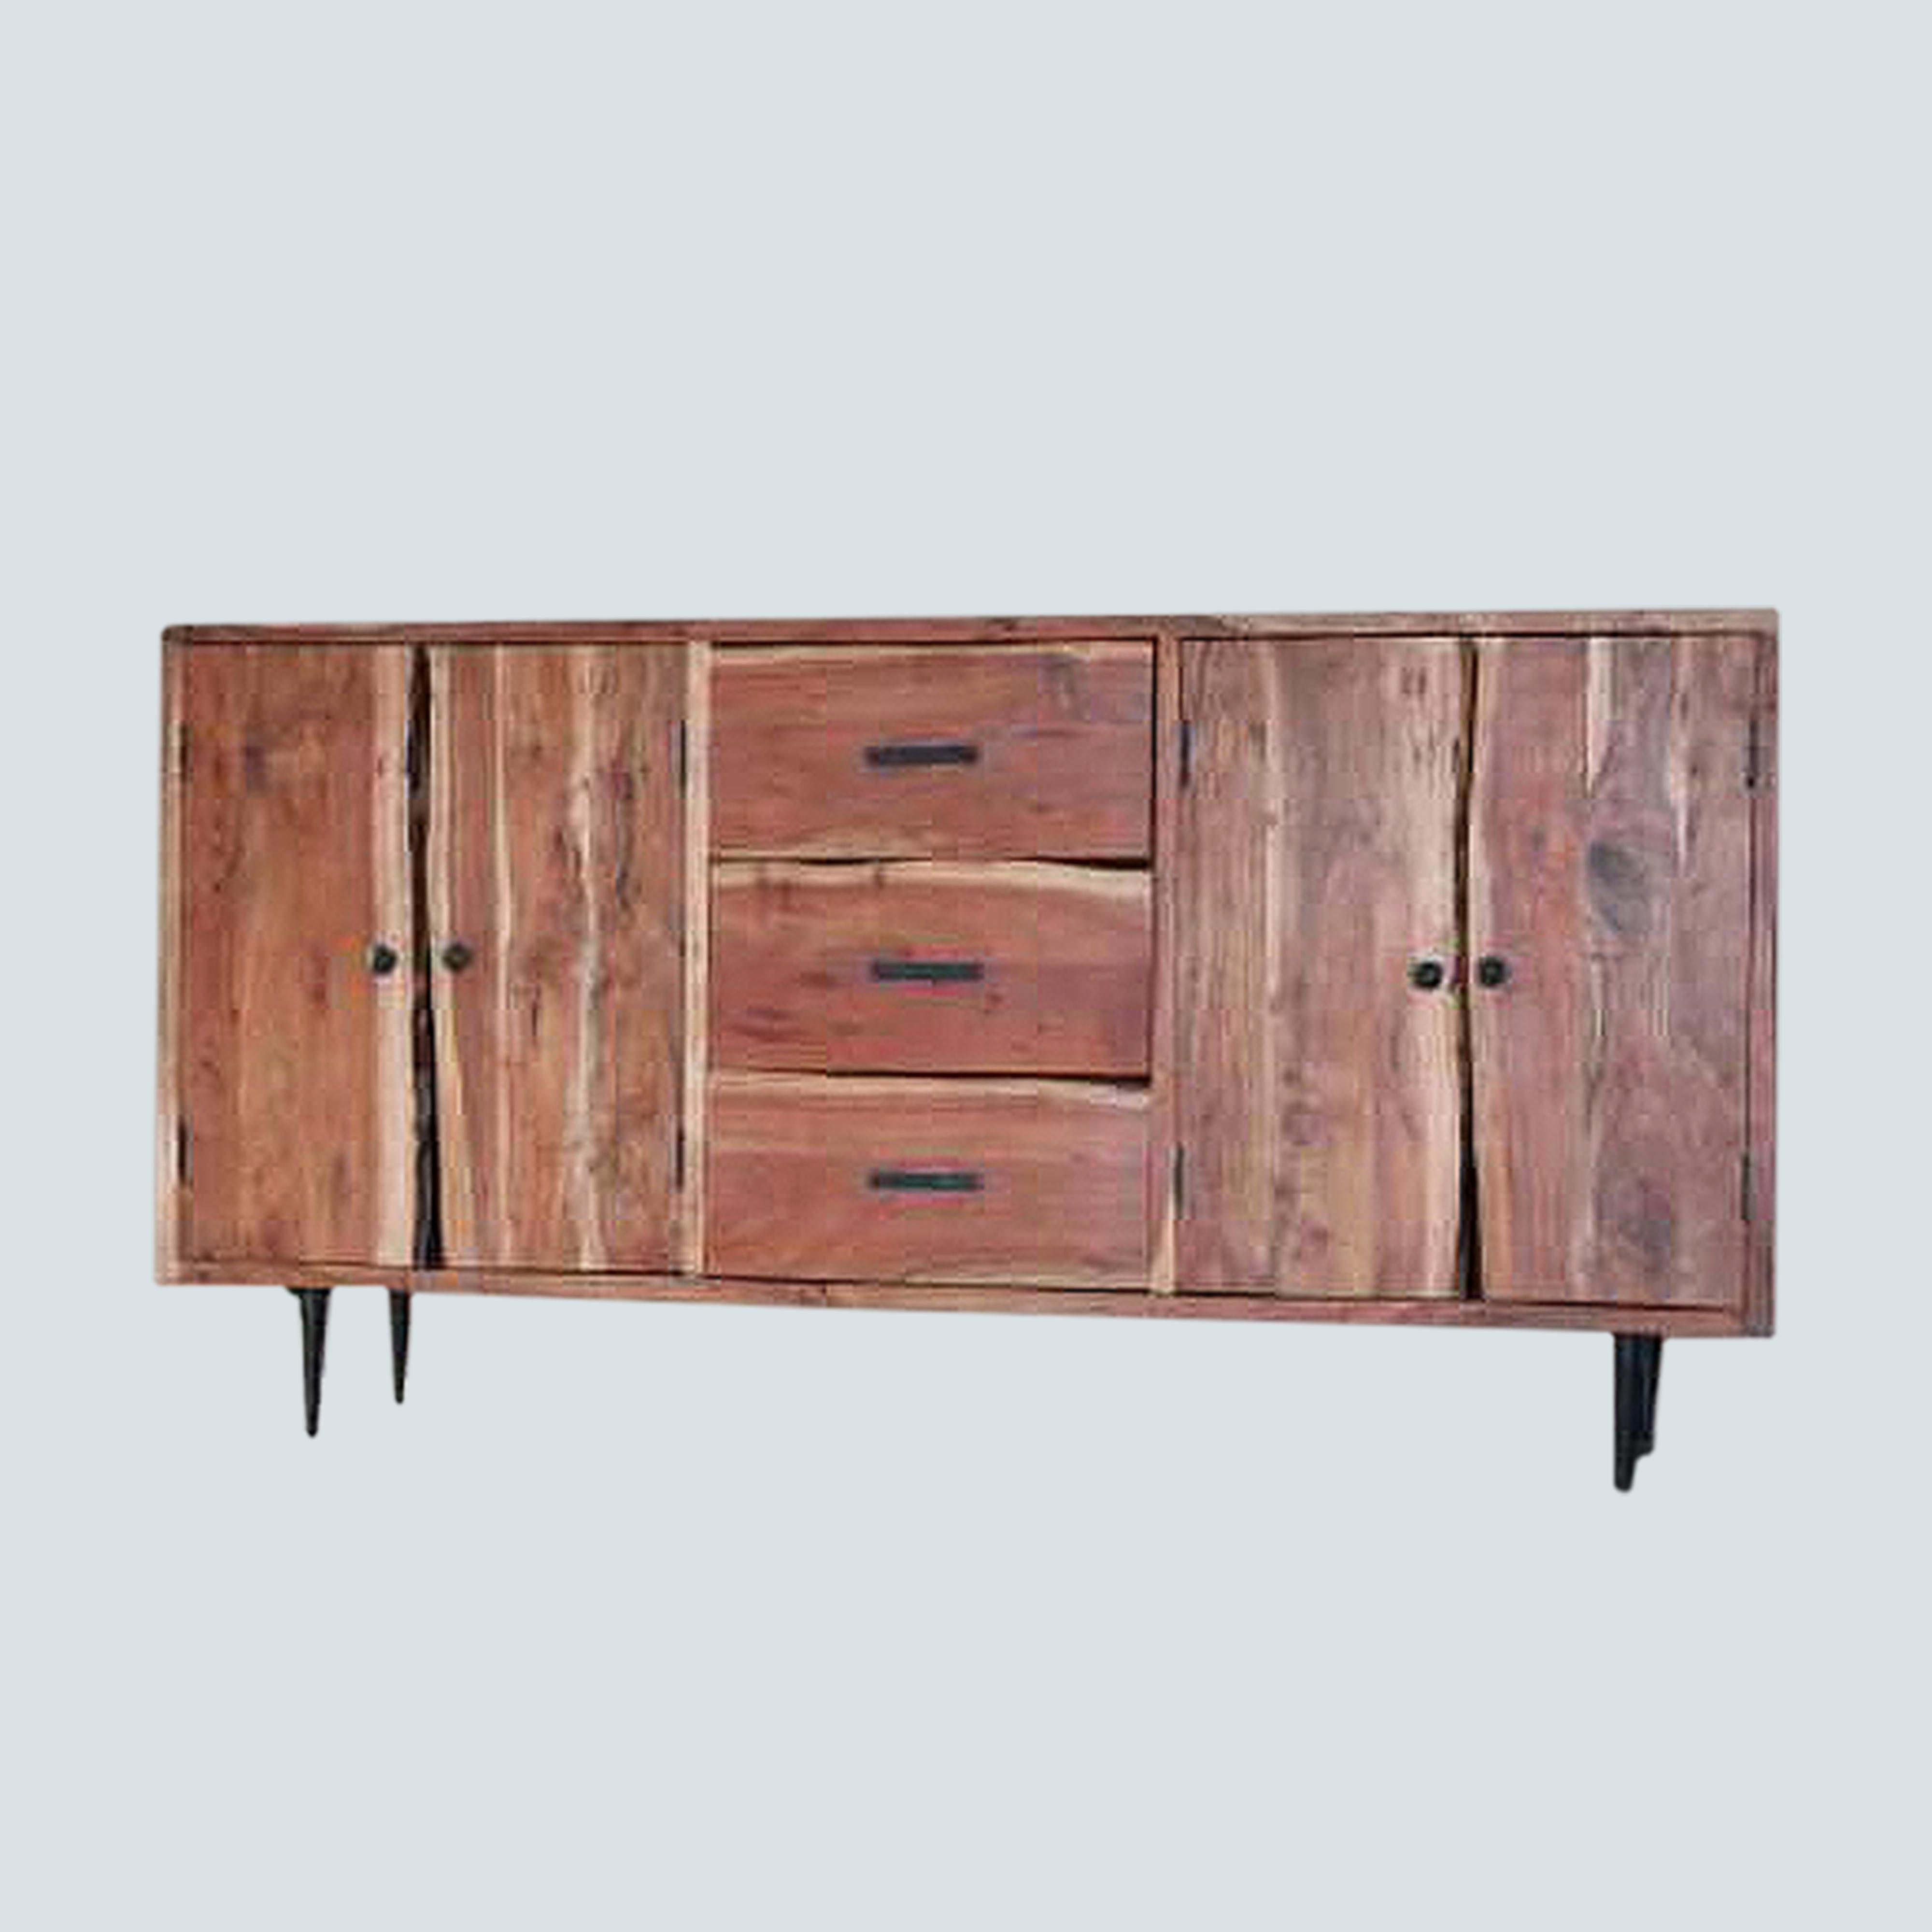 Sideboard Console Table, Accent cabinet Dresser, Chest of Drawers for storage, Cupboard, Sofa table